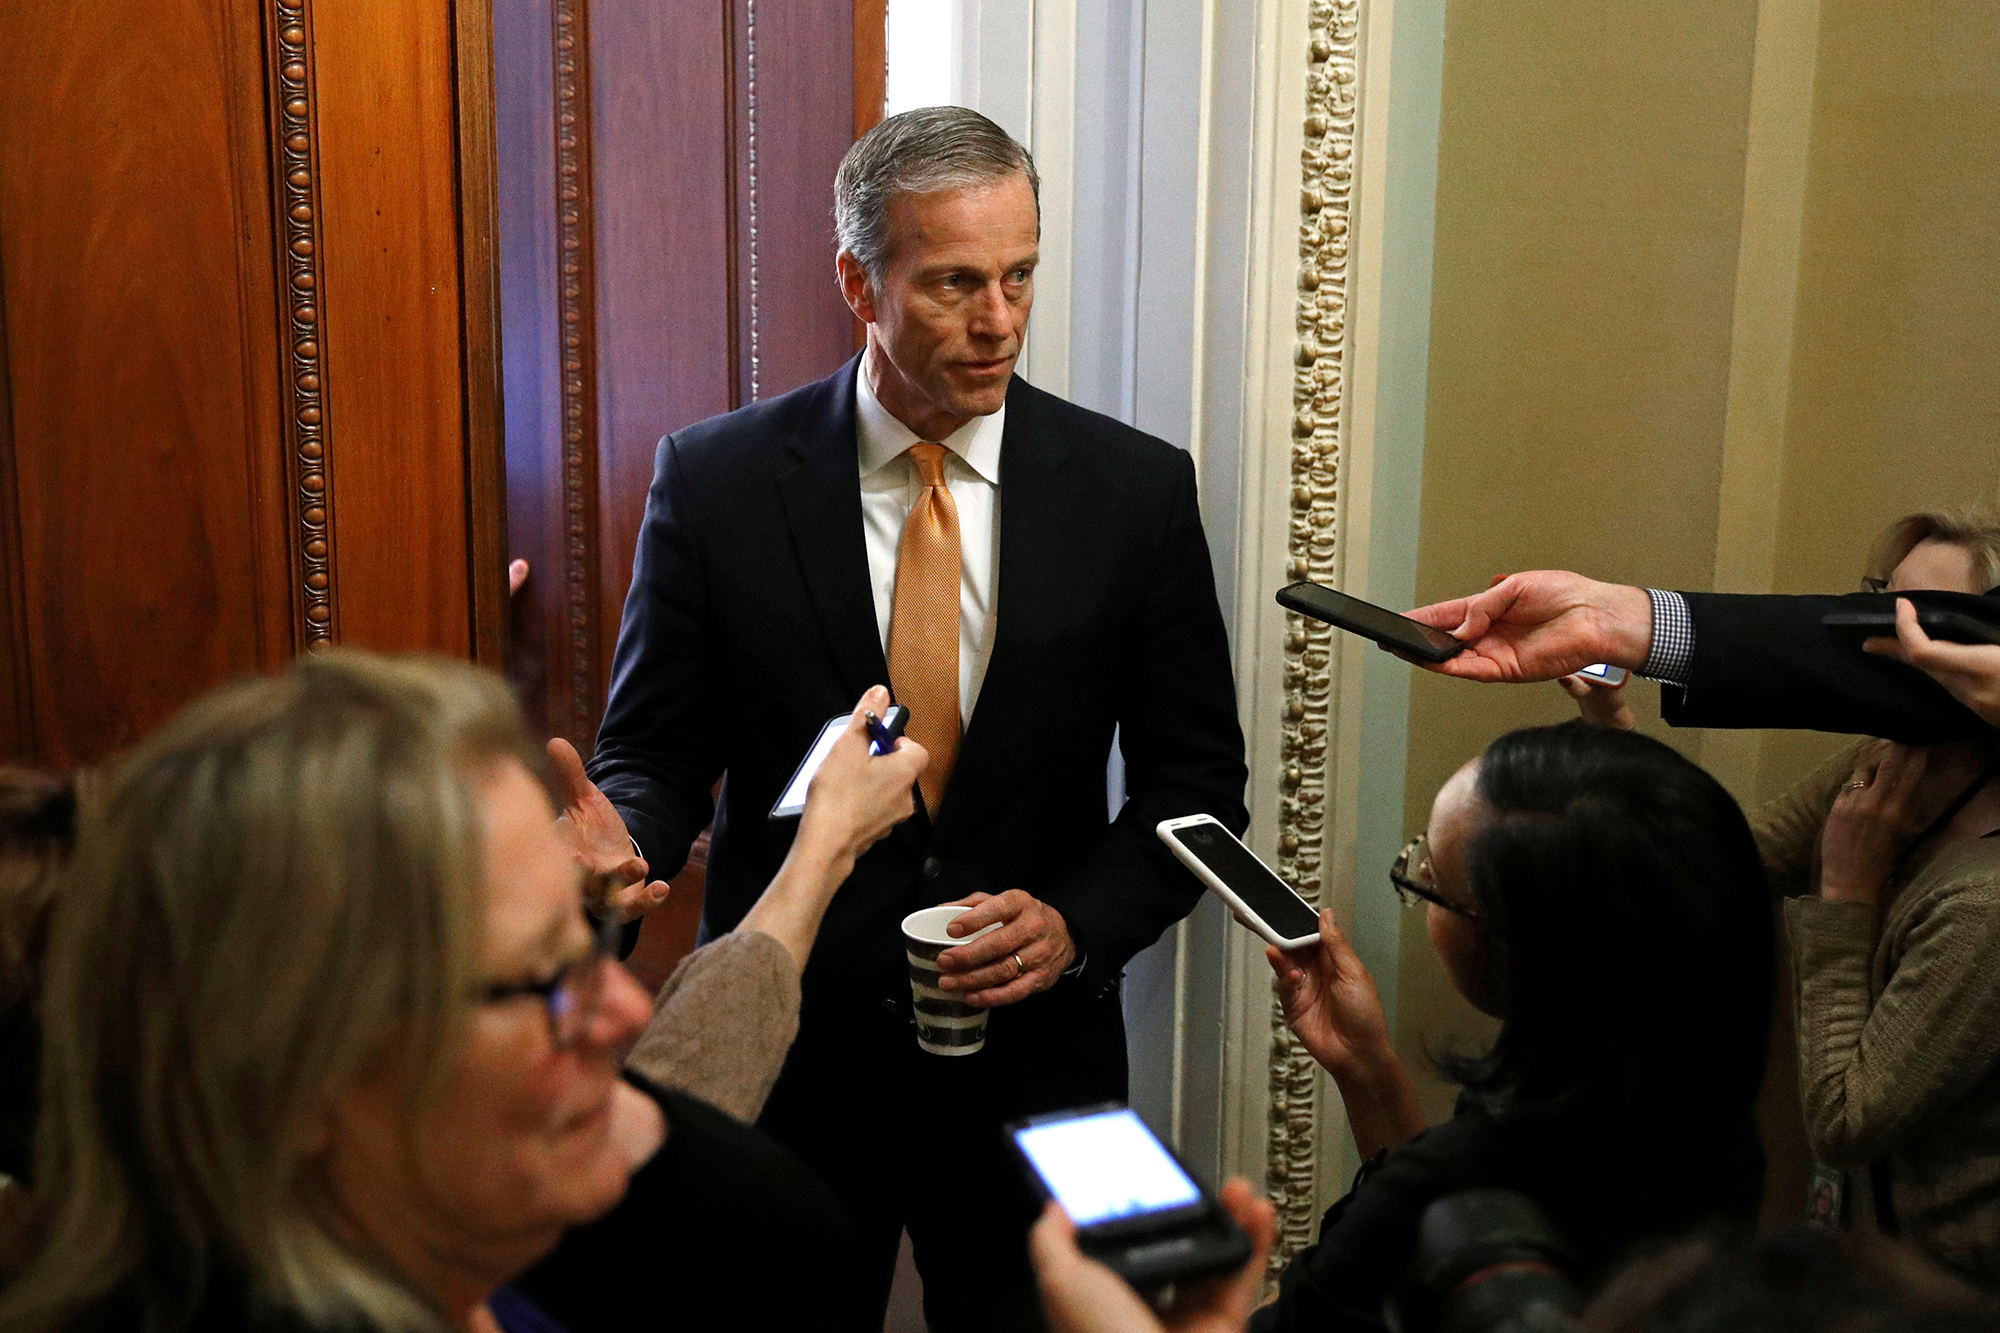 Senate Majority Whip John Thune speaks with reporters at the door to his office on Capitol Hill in Washington, Monday, March 16.